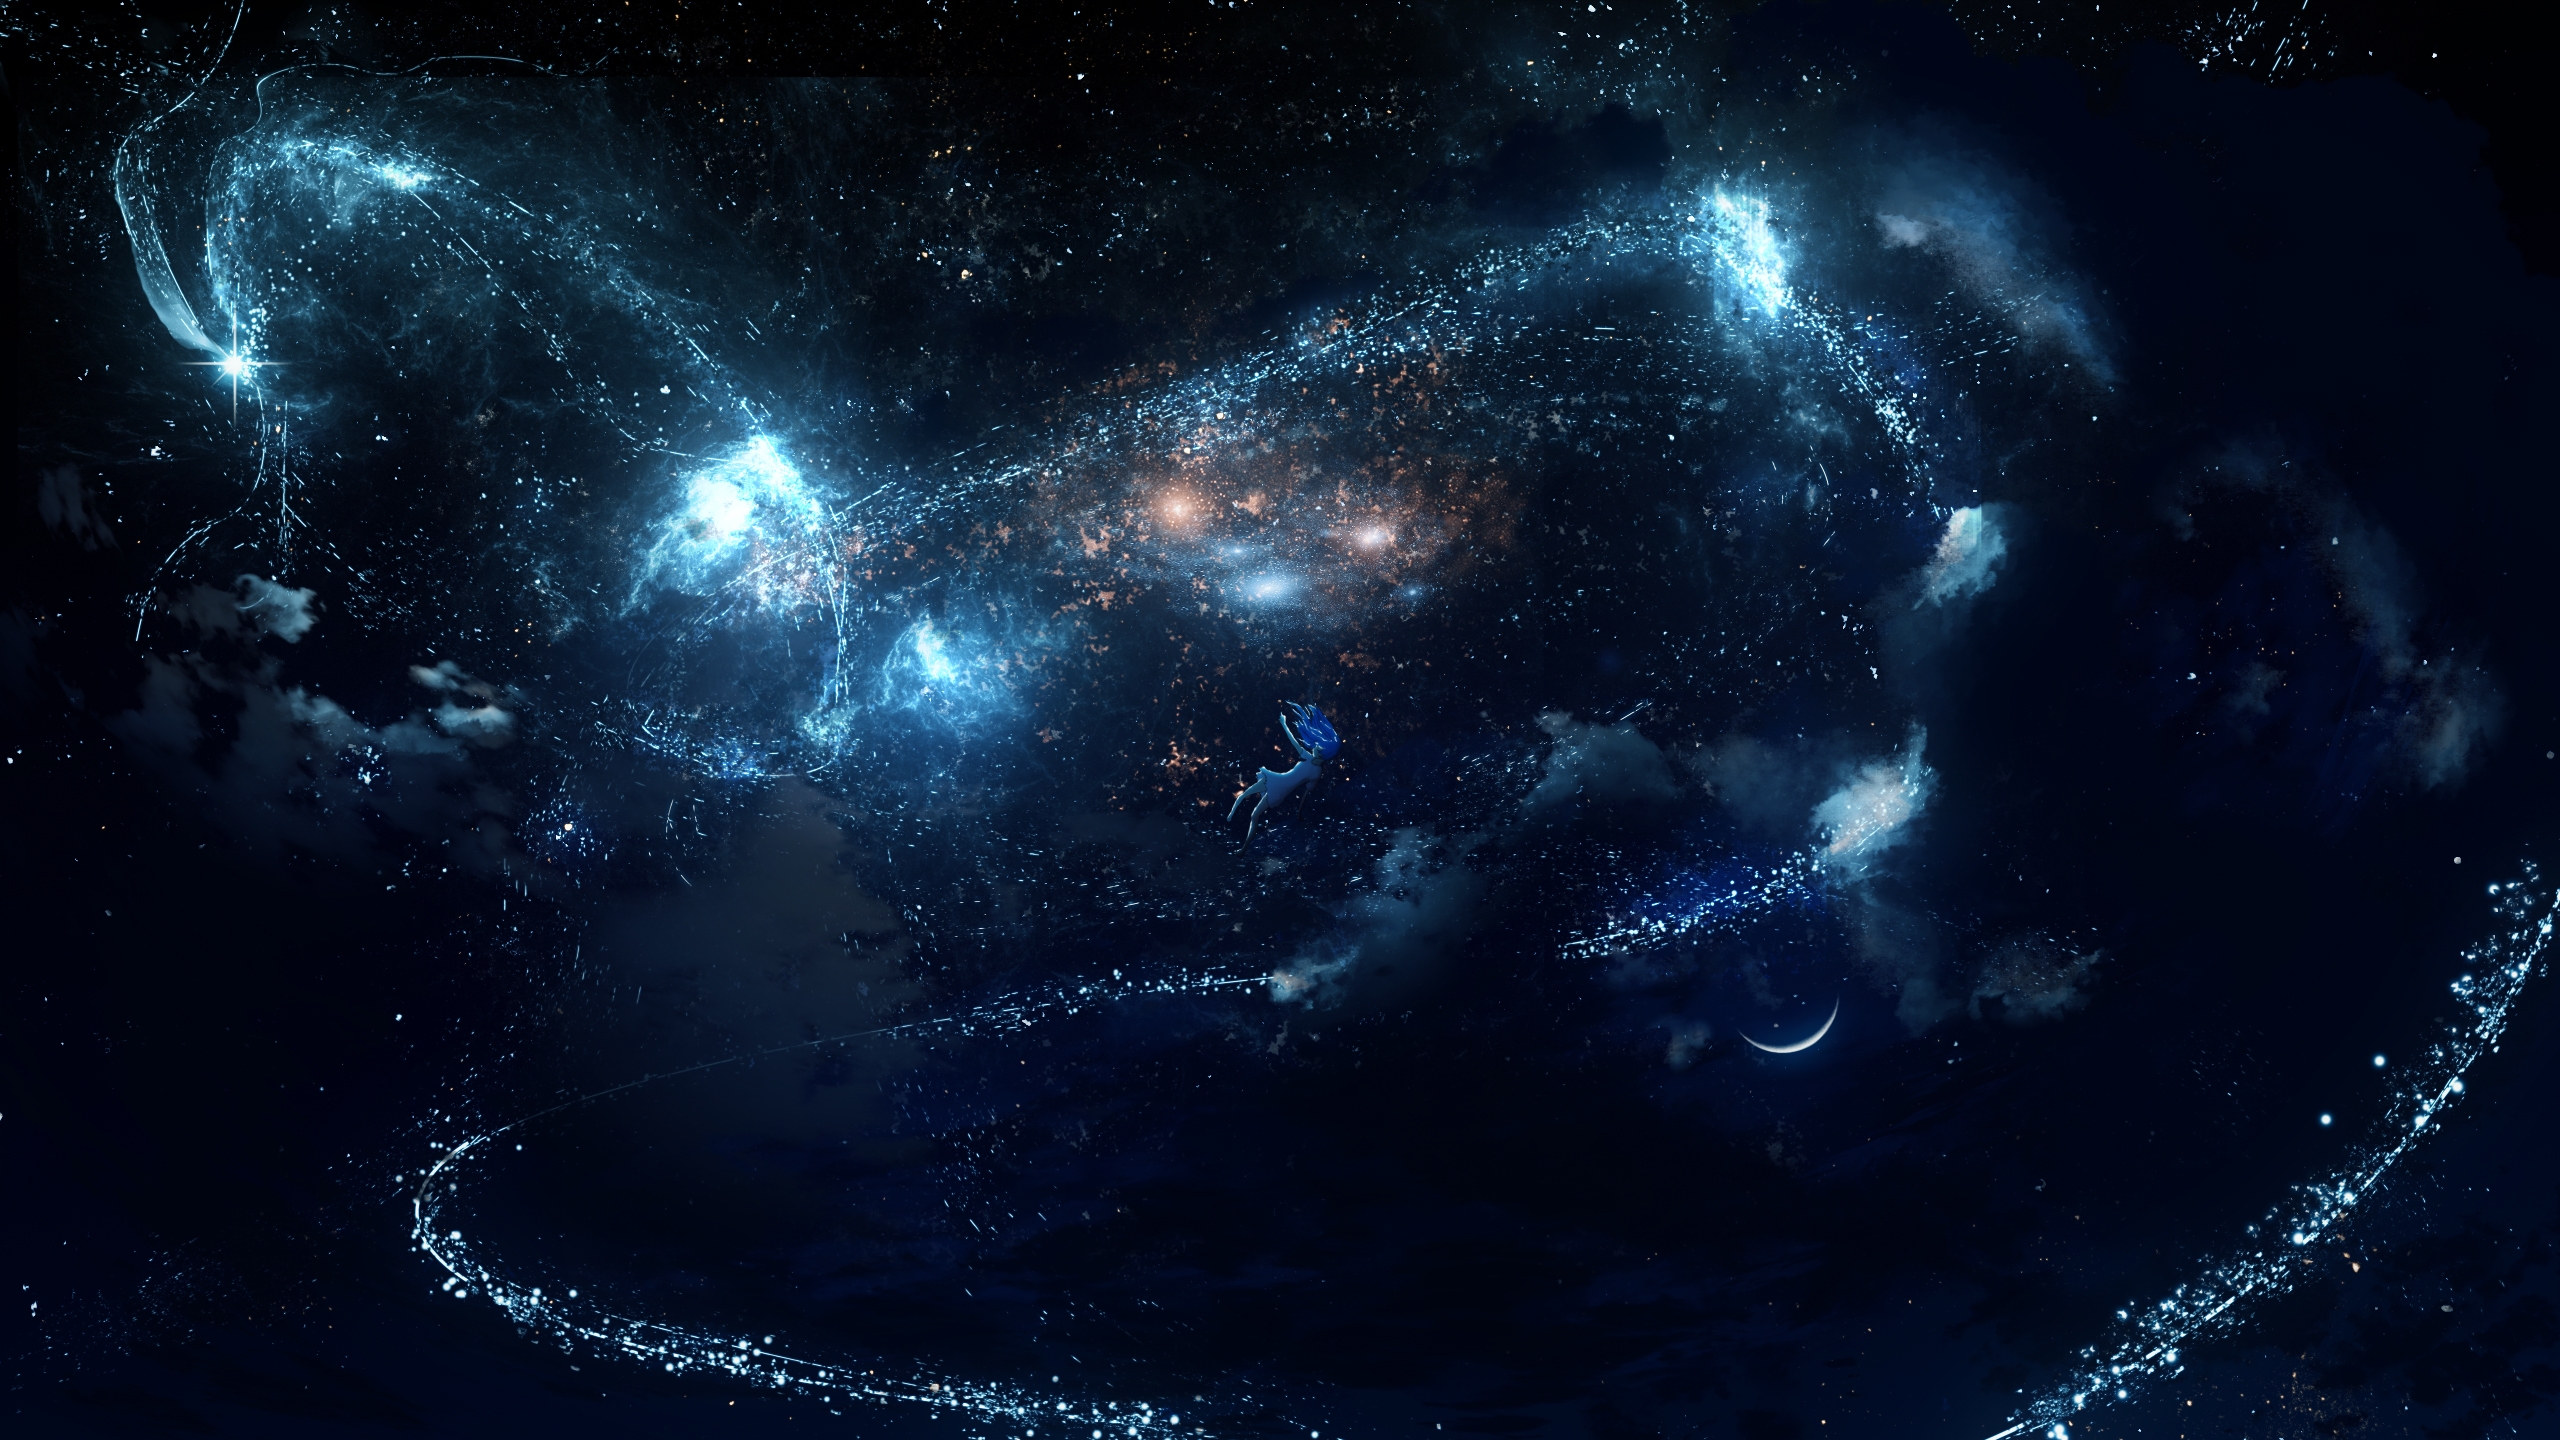 Download 1440x900 Nebula, Stars, Anime Girl, Falling Down, Space Wallpaper for MacBook Pro 15 inch, MacBook Air 13 inch